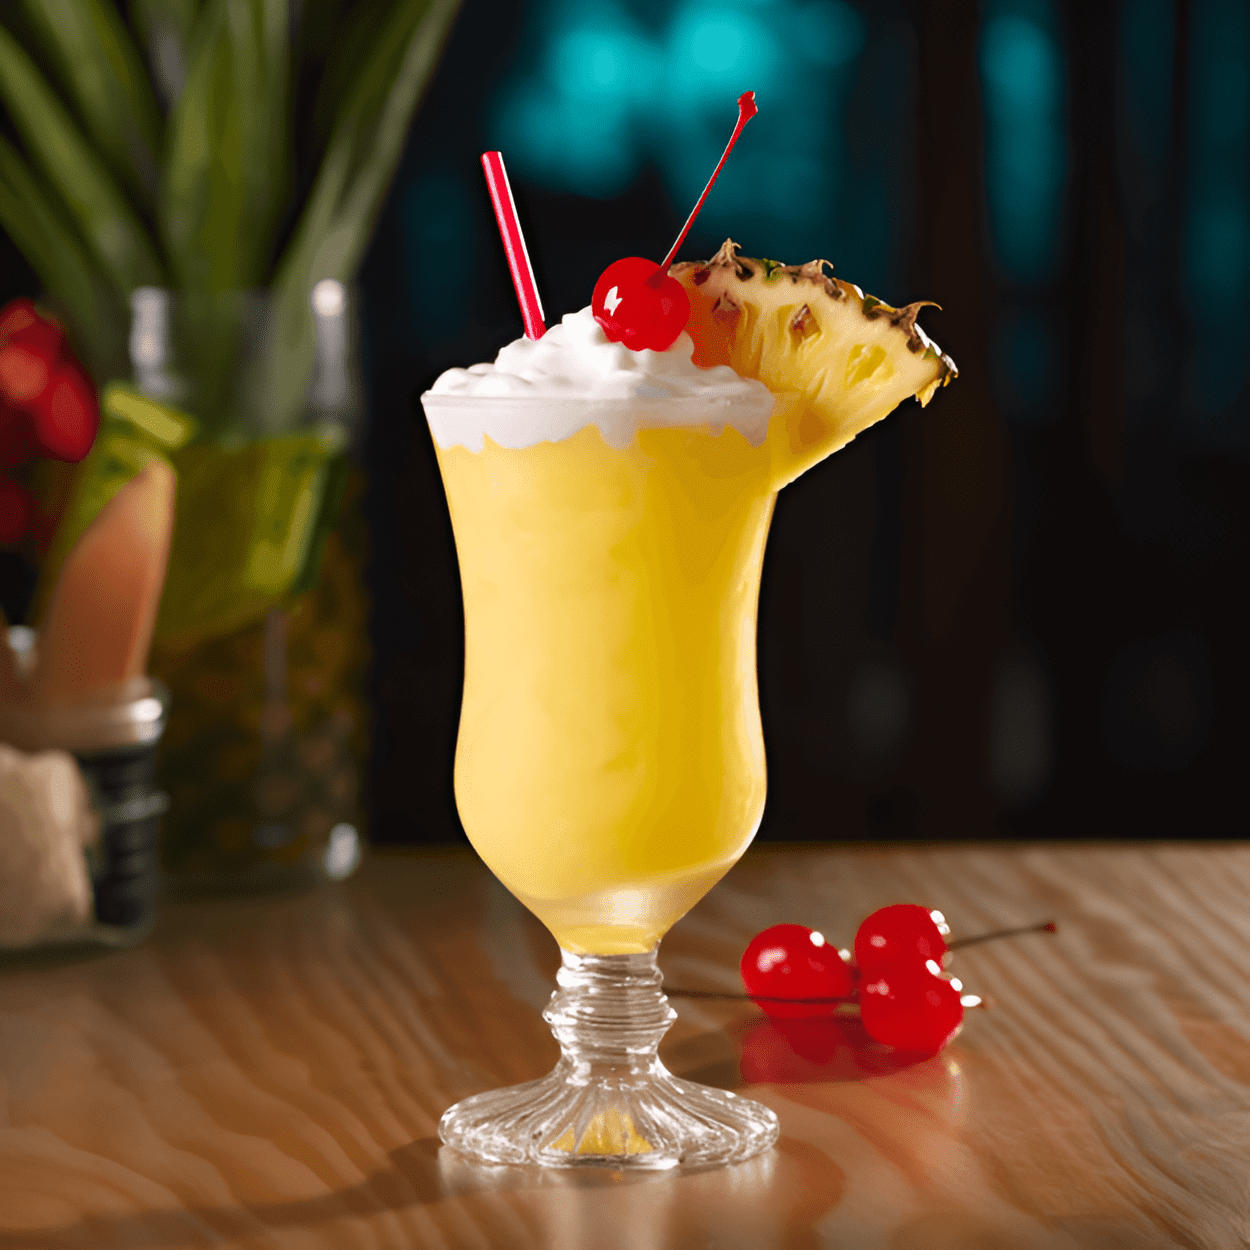 Banana Cabana Cocktail Recipe - The Banana Cabana is a sweet and tangy cocktail with a hint of tropical flavors. The banana liqueur gives it a sweet, fruity taste, while the pineapple juice adds a tangy twist. The coconut cream adds a creamy texture and a tropical flavor. The rum gives it a strong kick, making it a perfect cocktail for those who enjoy strong drinks.